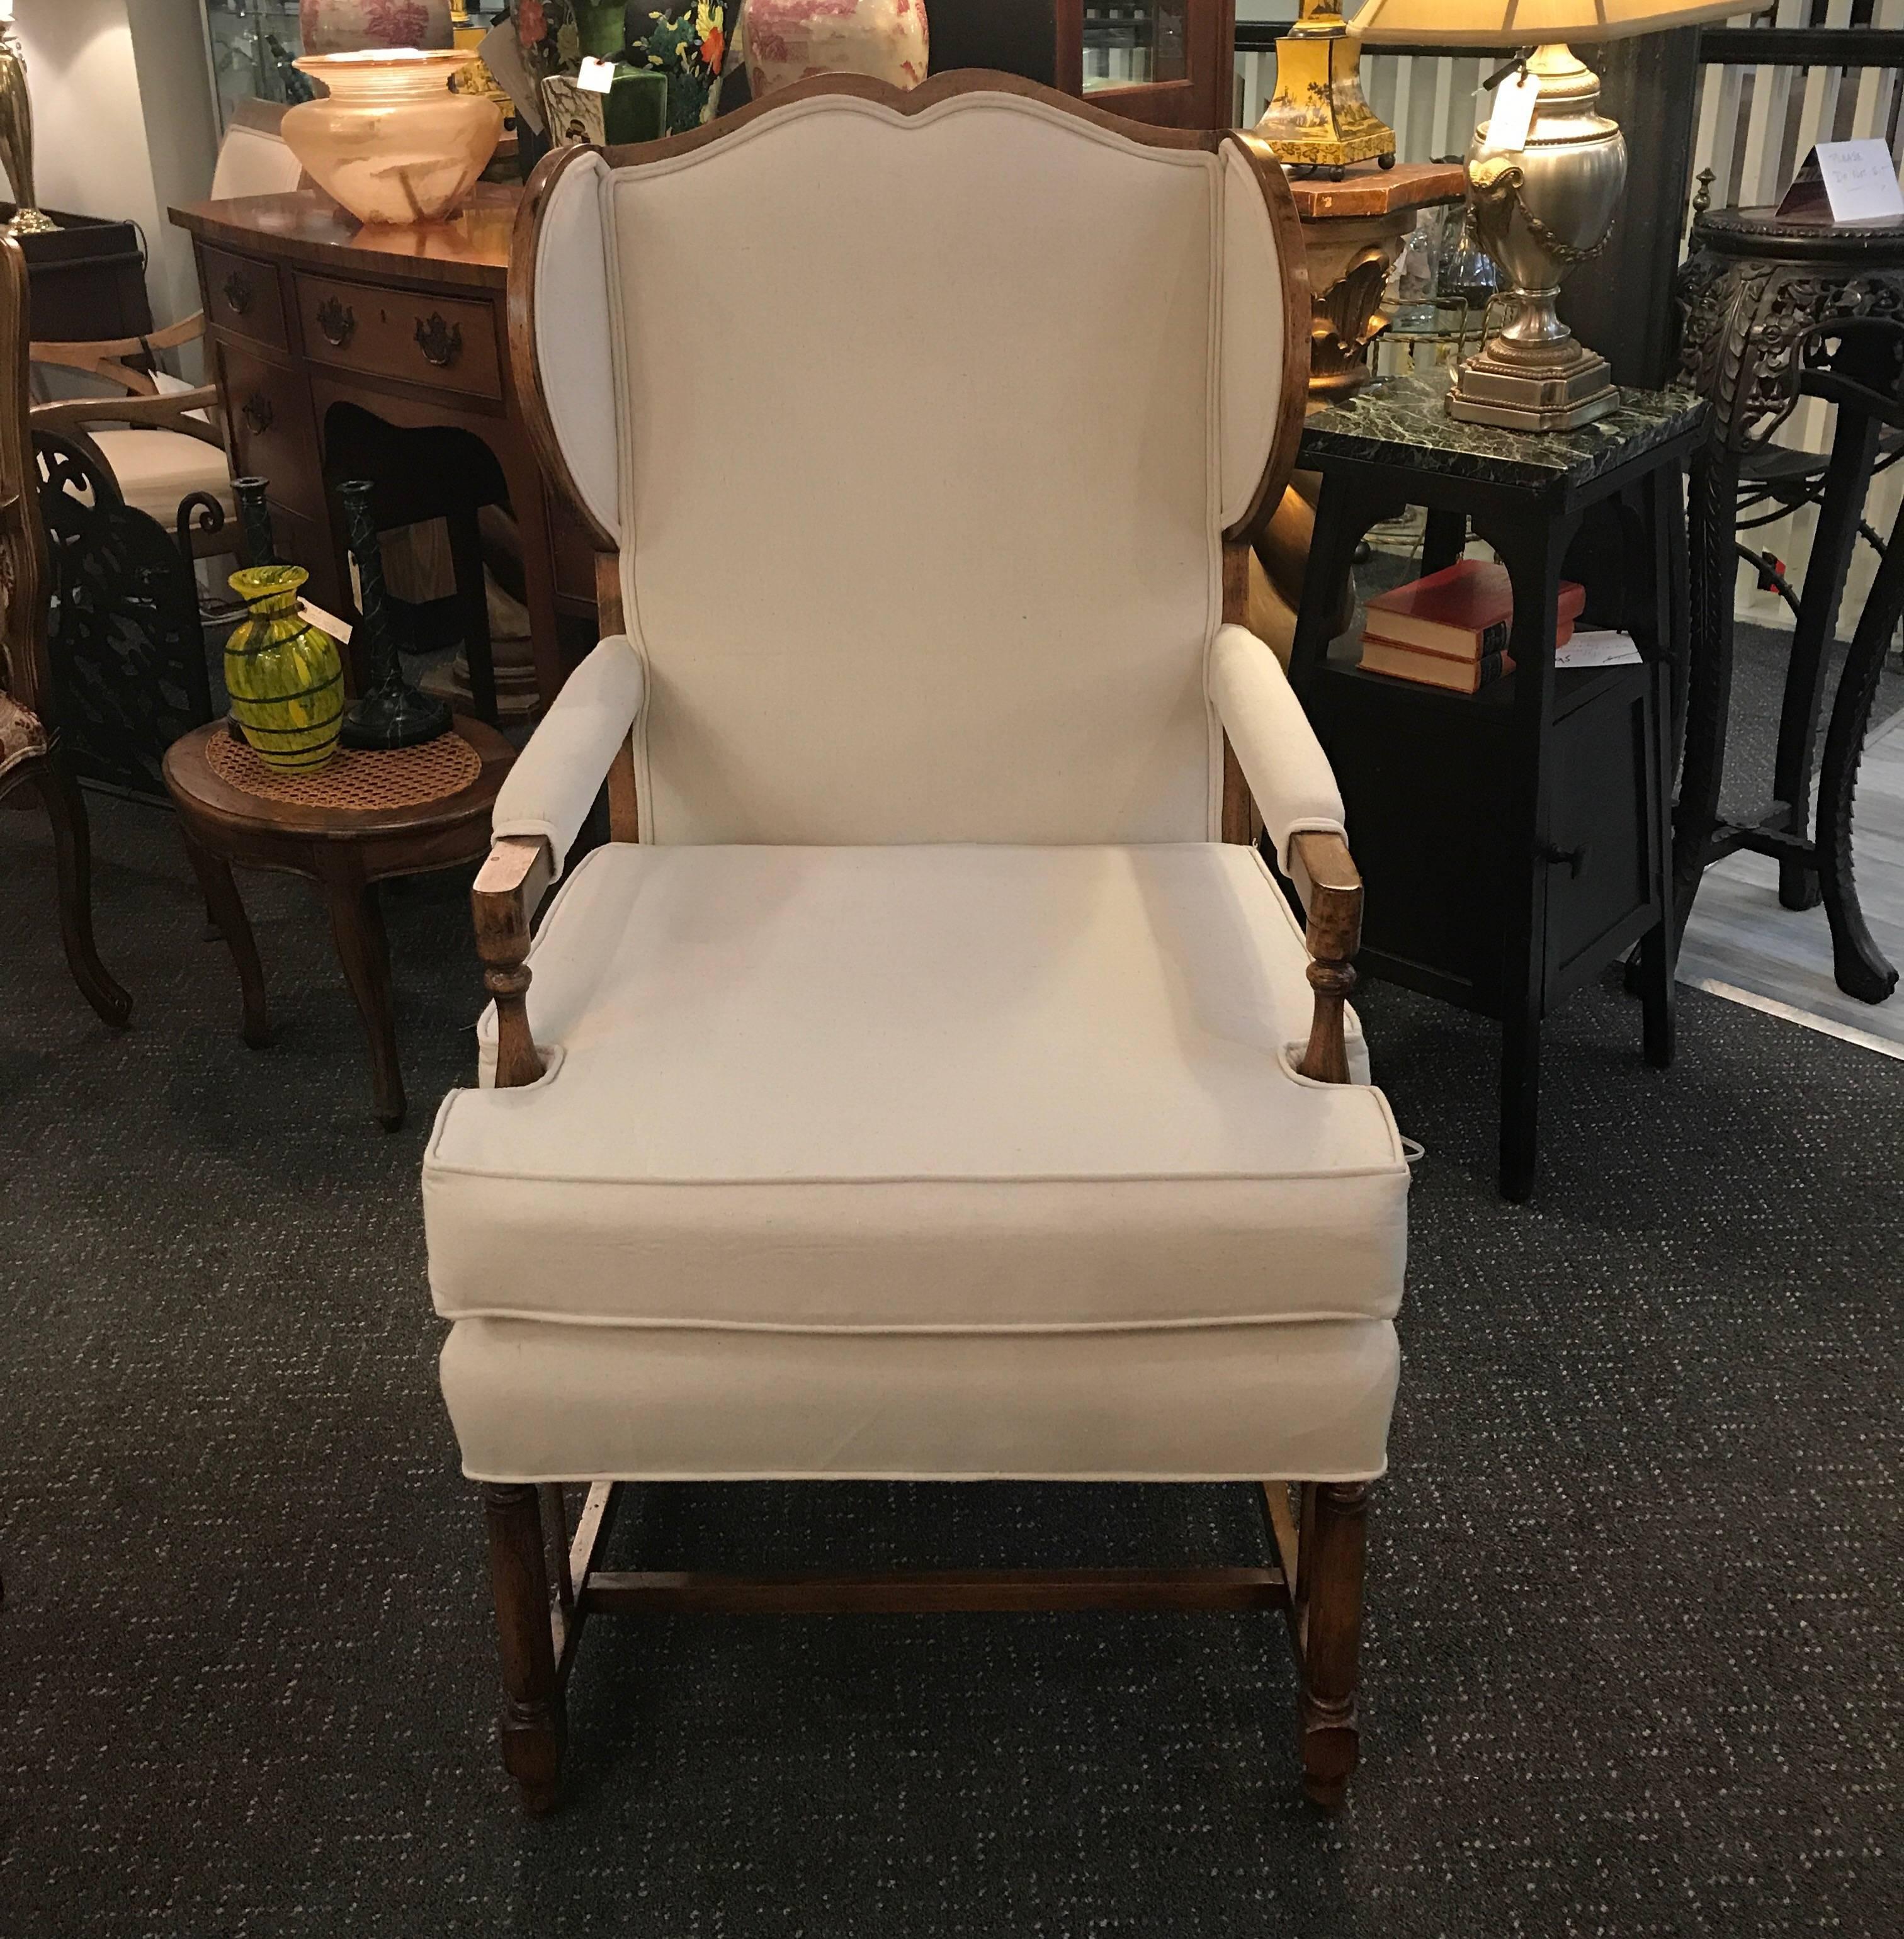 Charming open arm wing chair with a complimenting ottoman. The warm casual style in natural cotton linen. The frame with the wings on the chair having wood on the outside. The ottoman frame is a complimenting color but the leg is different from the